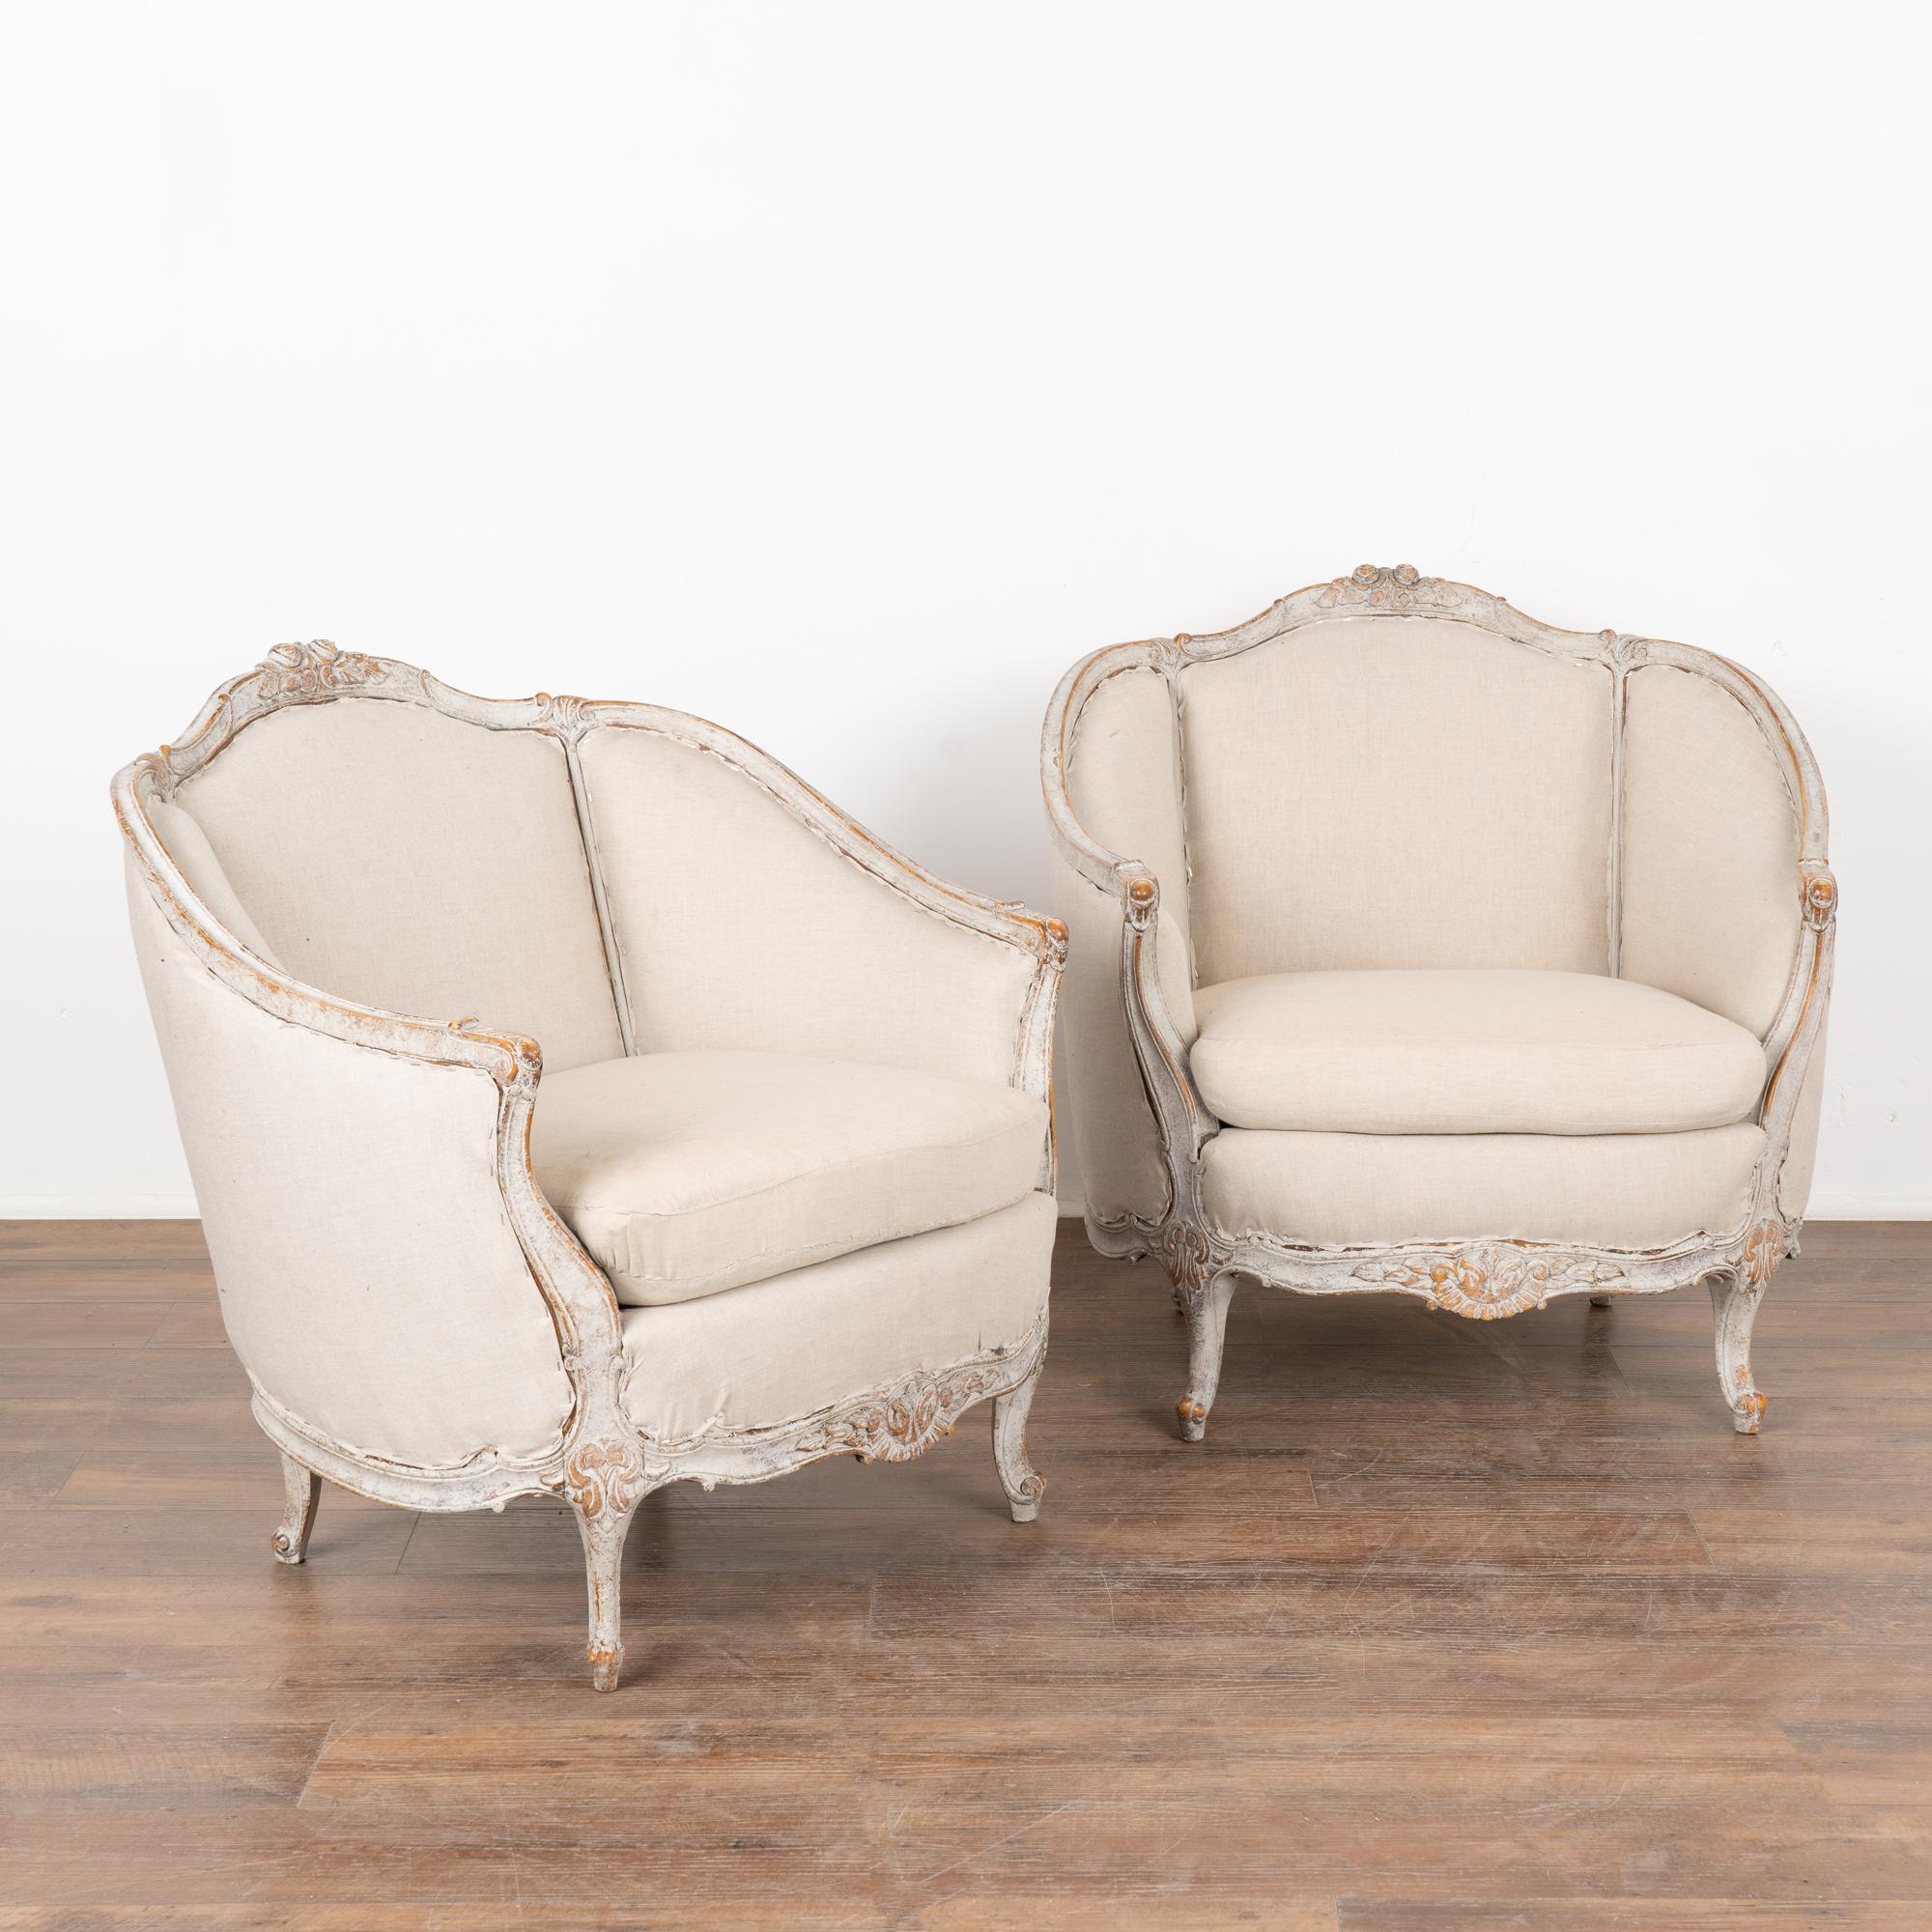 This pair of Swedish arm chairs have a gently curved barrel back, cabriolet legs and decorative carving embellish the skirt which all add to the graceful appeal of each.
The newer professionally applied white layered painted finish has been gently